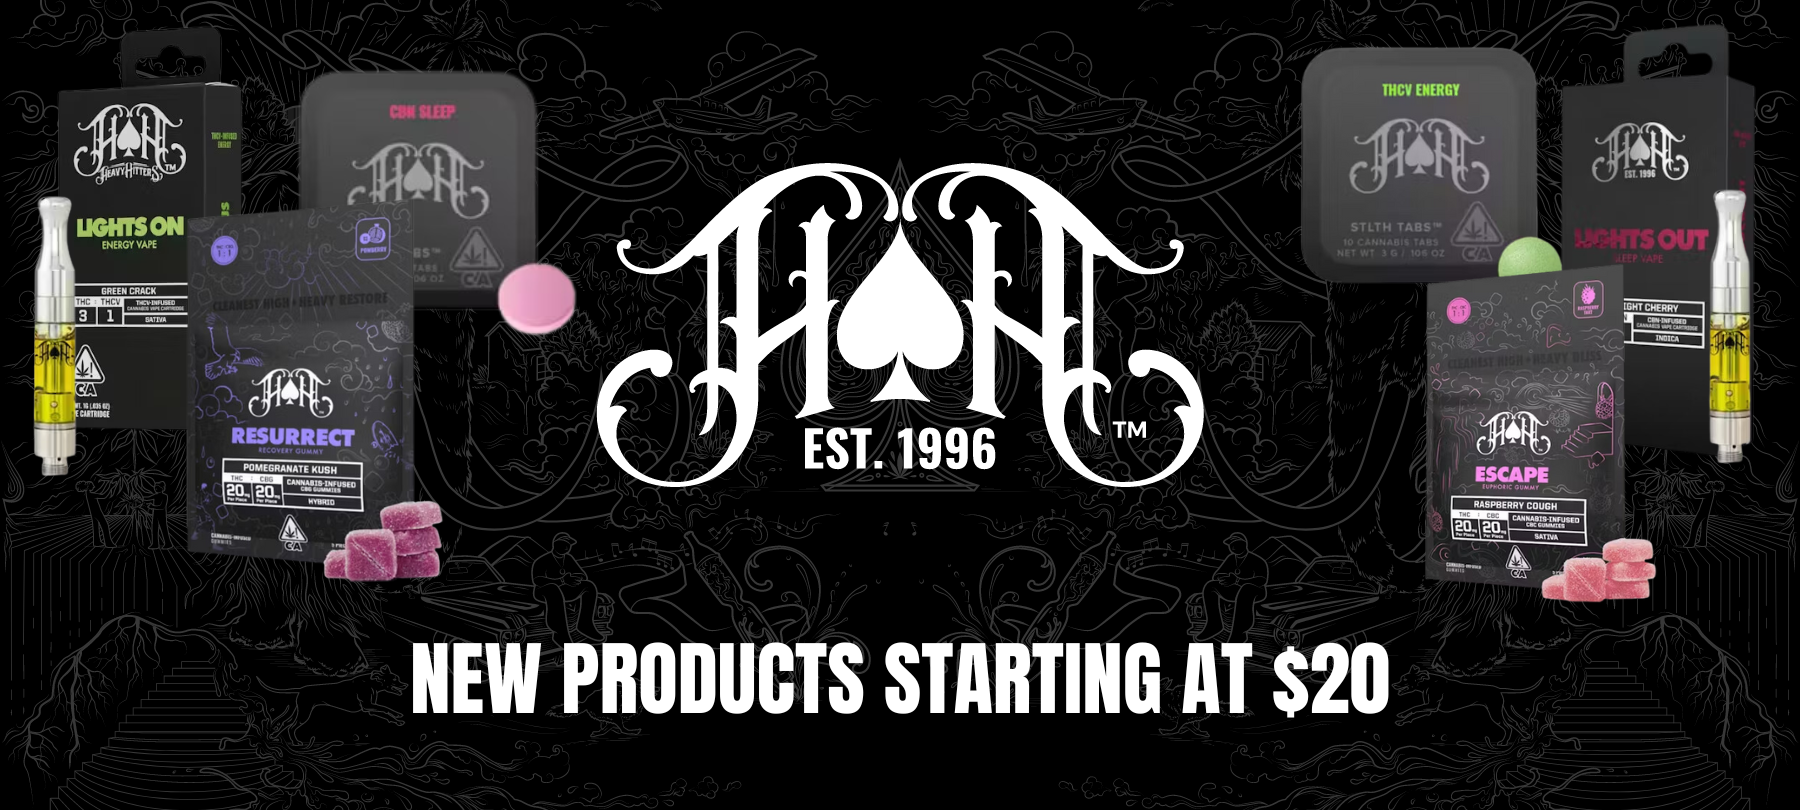 Heavy Hitters has new products starting at $20